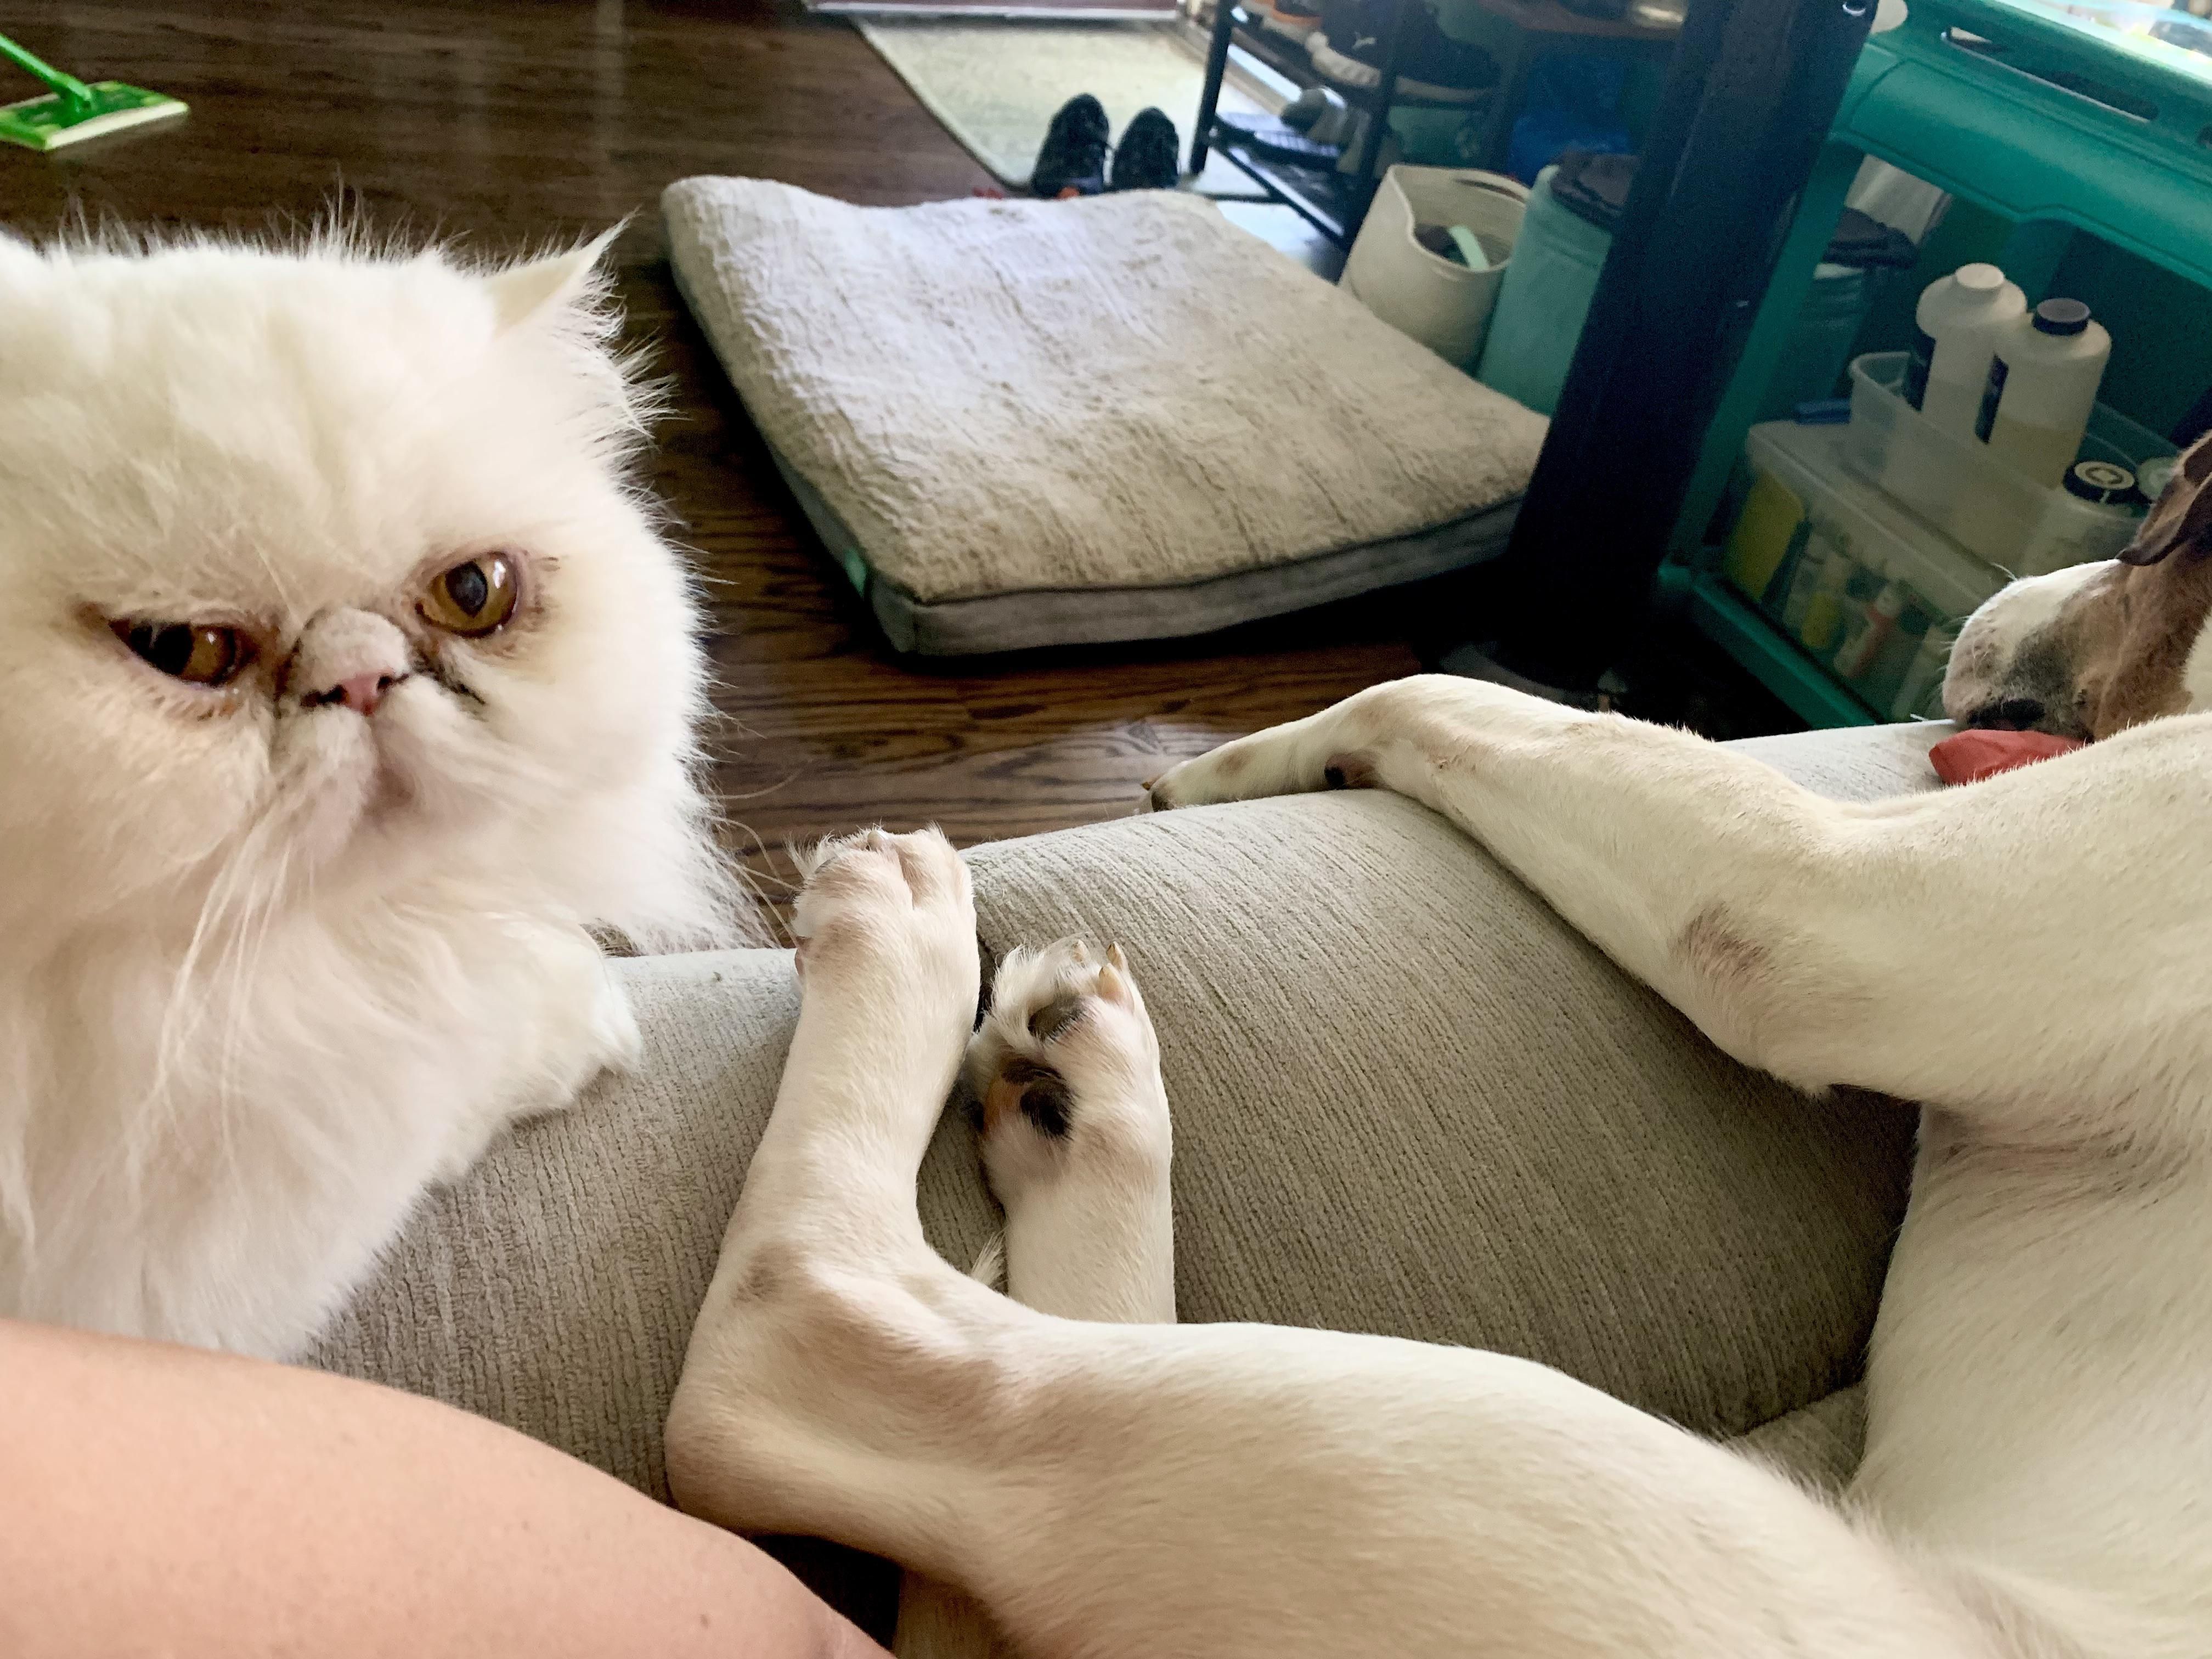 We adopted a dog a few weeks ago and the cat is finally ready to hate him up close.